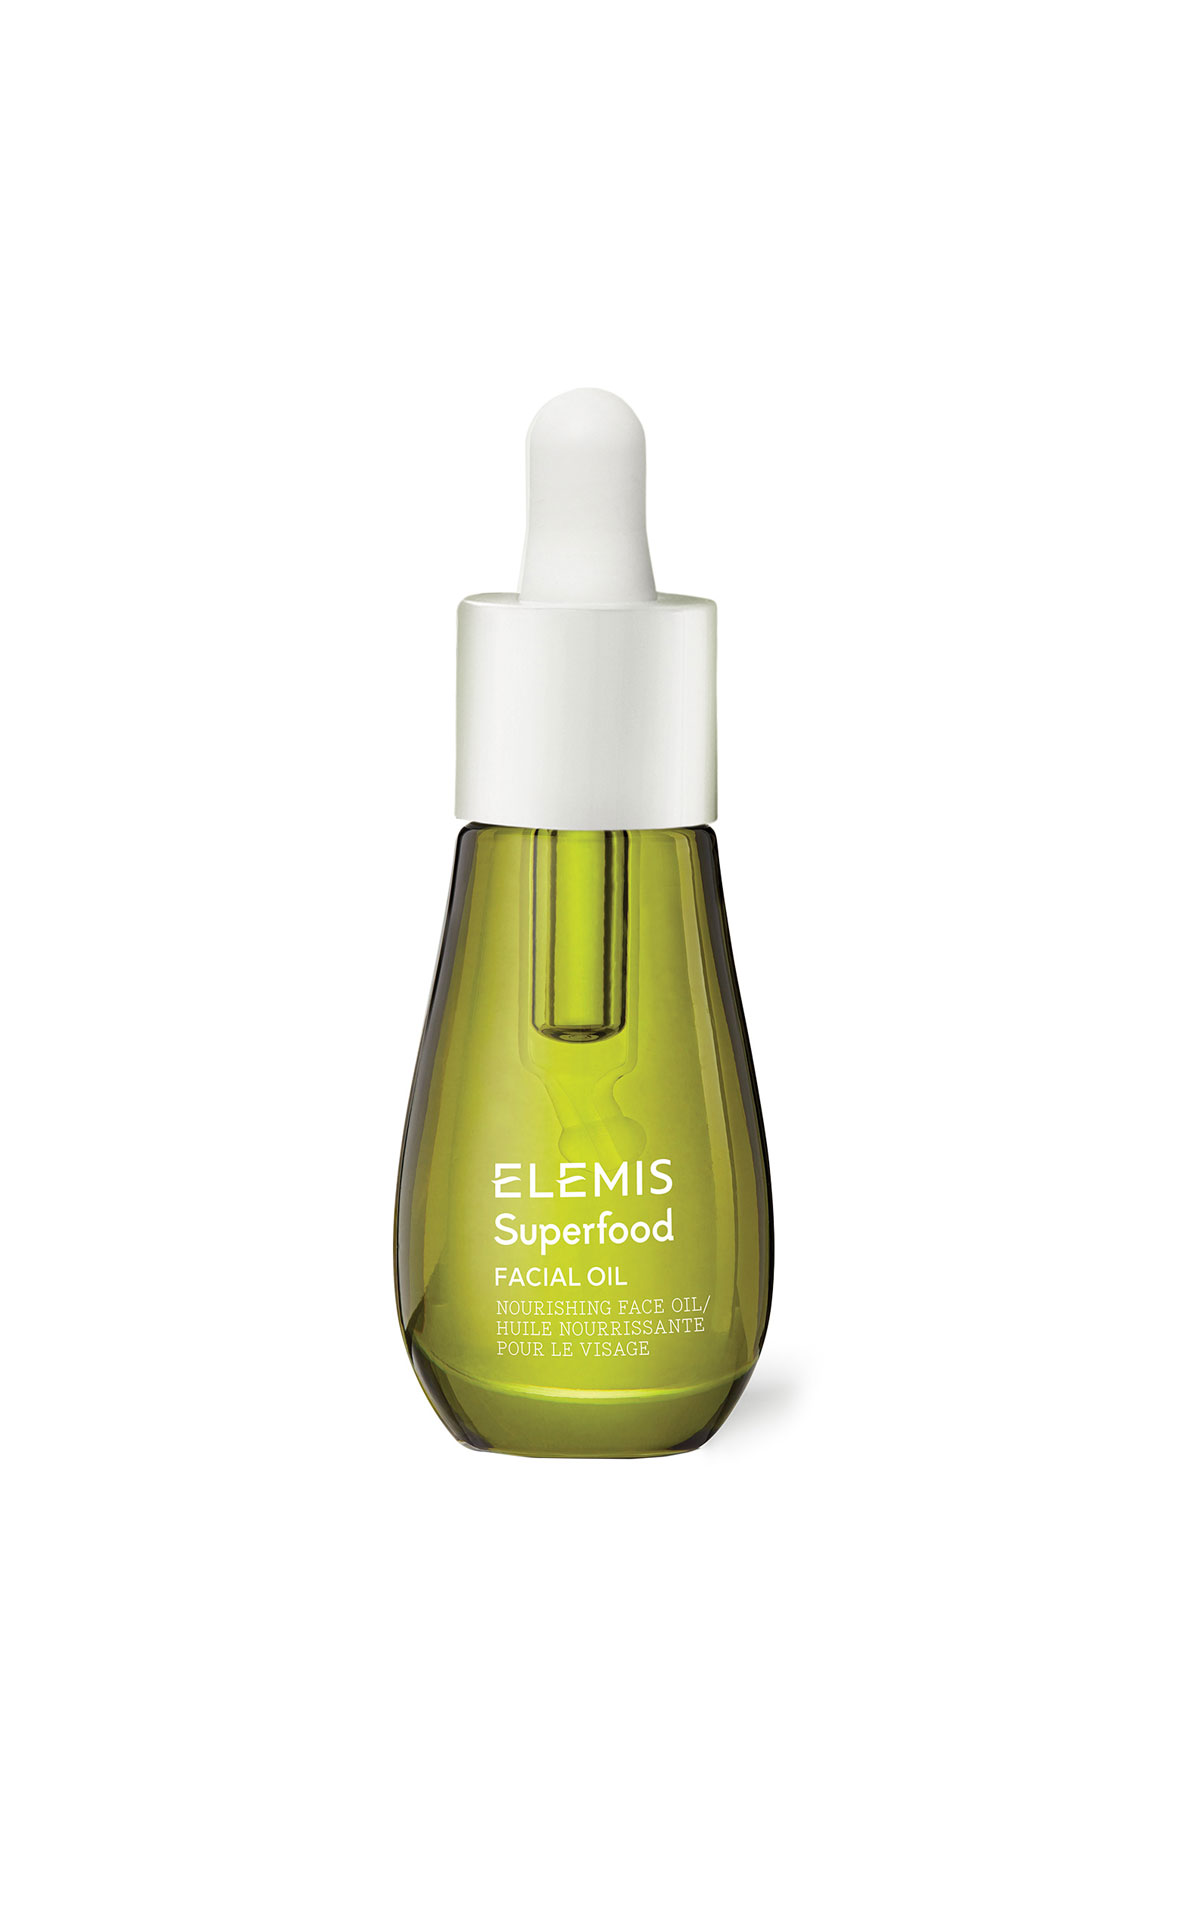 ELEMIS Superfood facial oil 15ml from Bicester Village